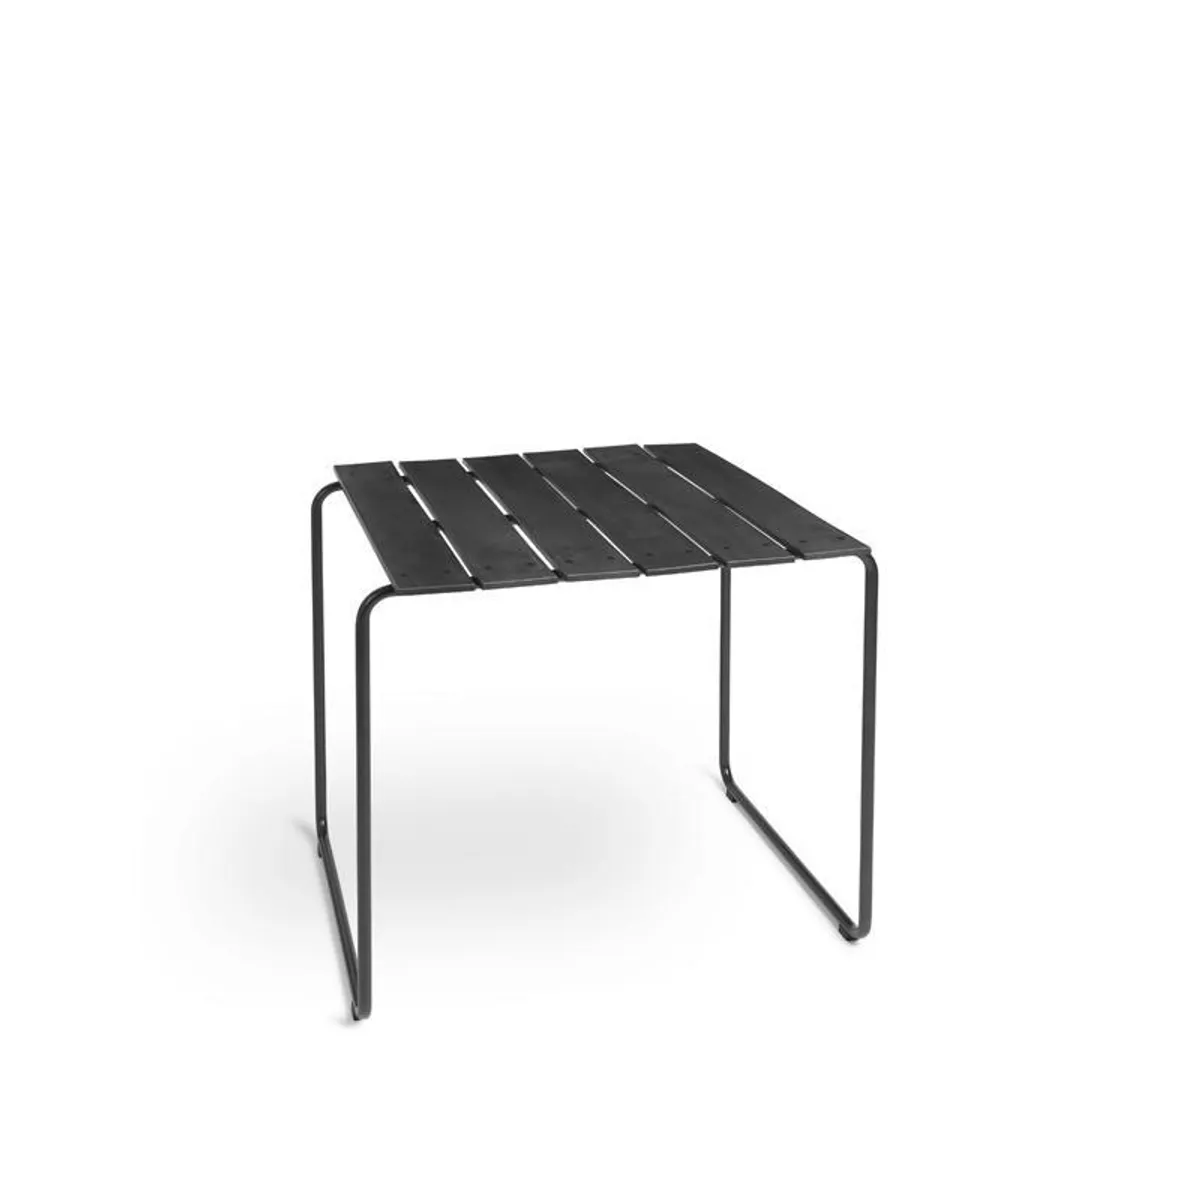 Ocean Table Recycled Plastic Waste With Metal Sled Legs Outdoor Dining Table In Black Inside Out Contracts